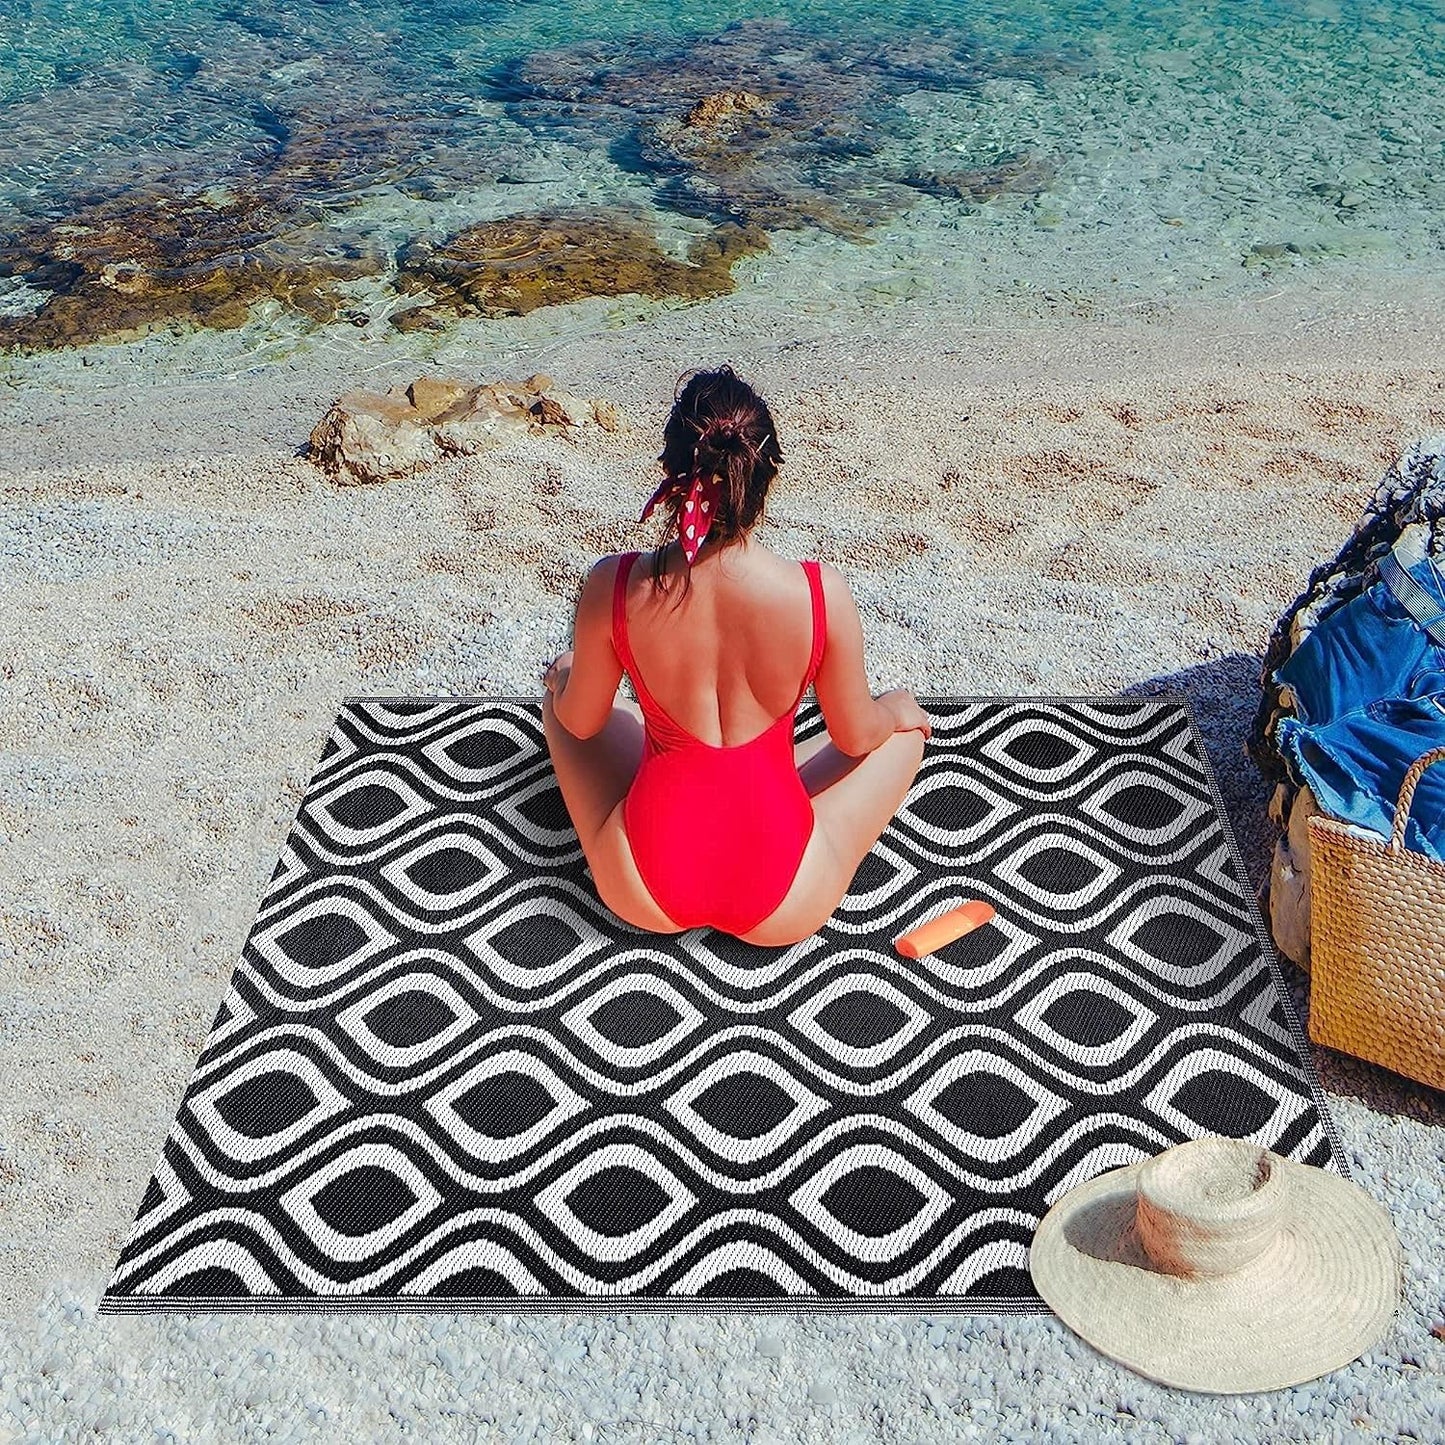 Playa Outdoor Rug - Crease-Free Recycled Plastic Floor Mat for Patio, Camping, Beach, Balcony, Porch, Deck - Weather, Water, Stain, Lightweight, Fade and UV Resistant - Venice- Black & White